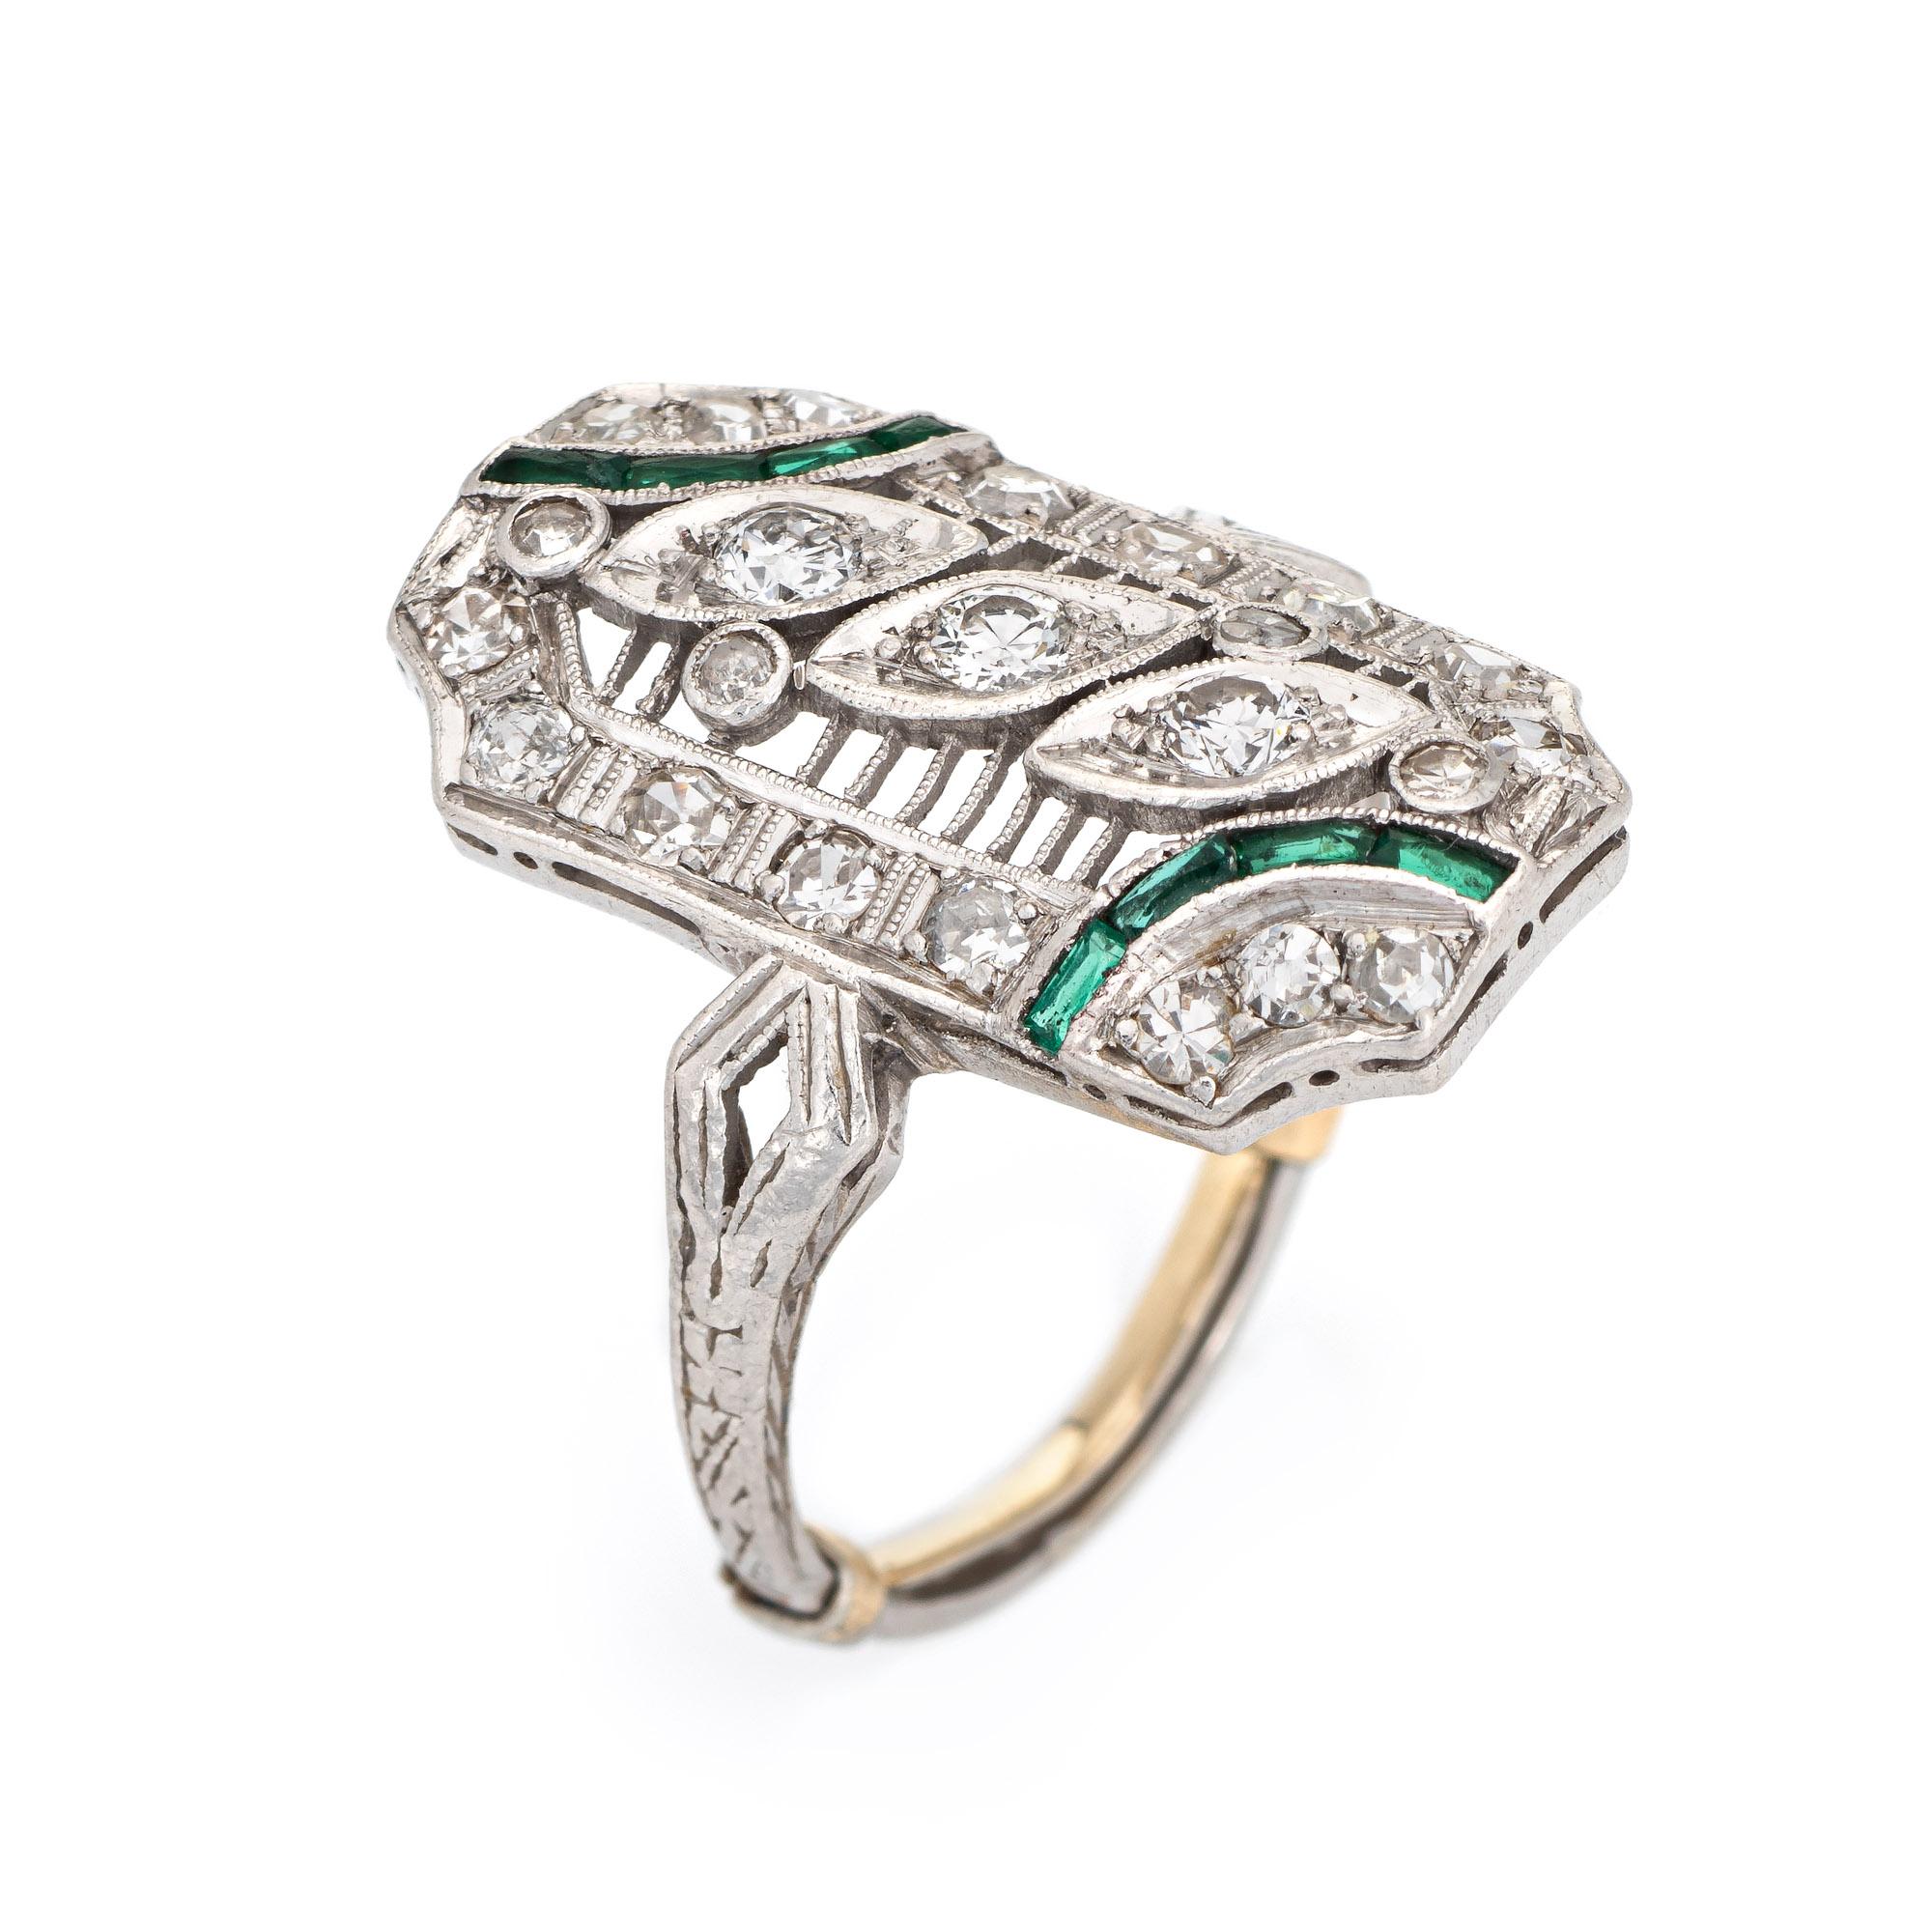 Finely detailed vintage Art Deco era diamond & emerald ring (circa 1920s to 1930s) crafted in 900 platinum. 

Old European and single cut diamonds total an estimated 1 carat (estimated at H0I color and VS2-SI2 clarity). The emeralds total an